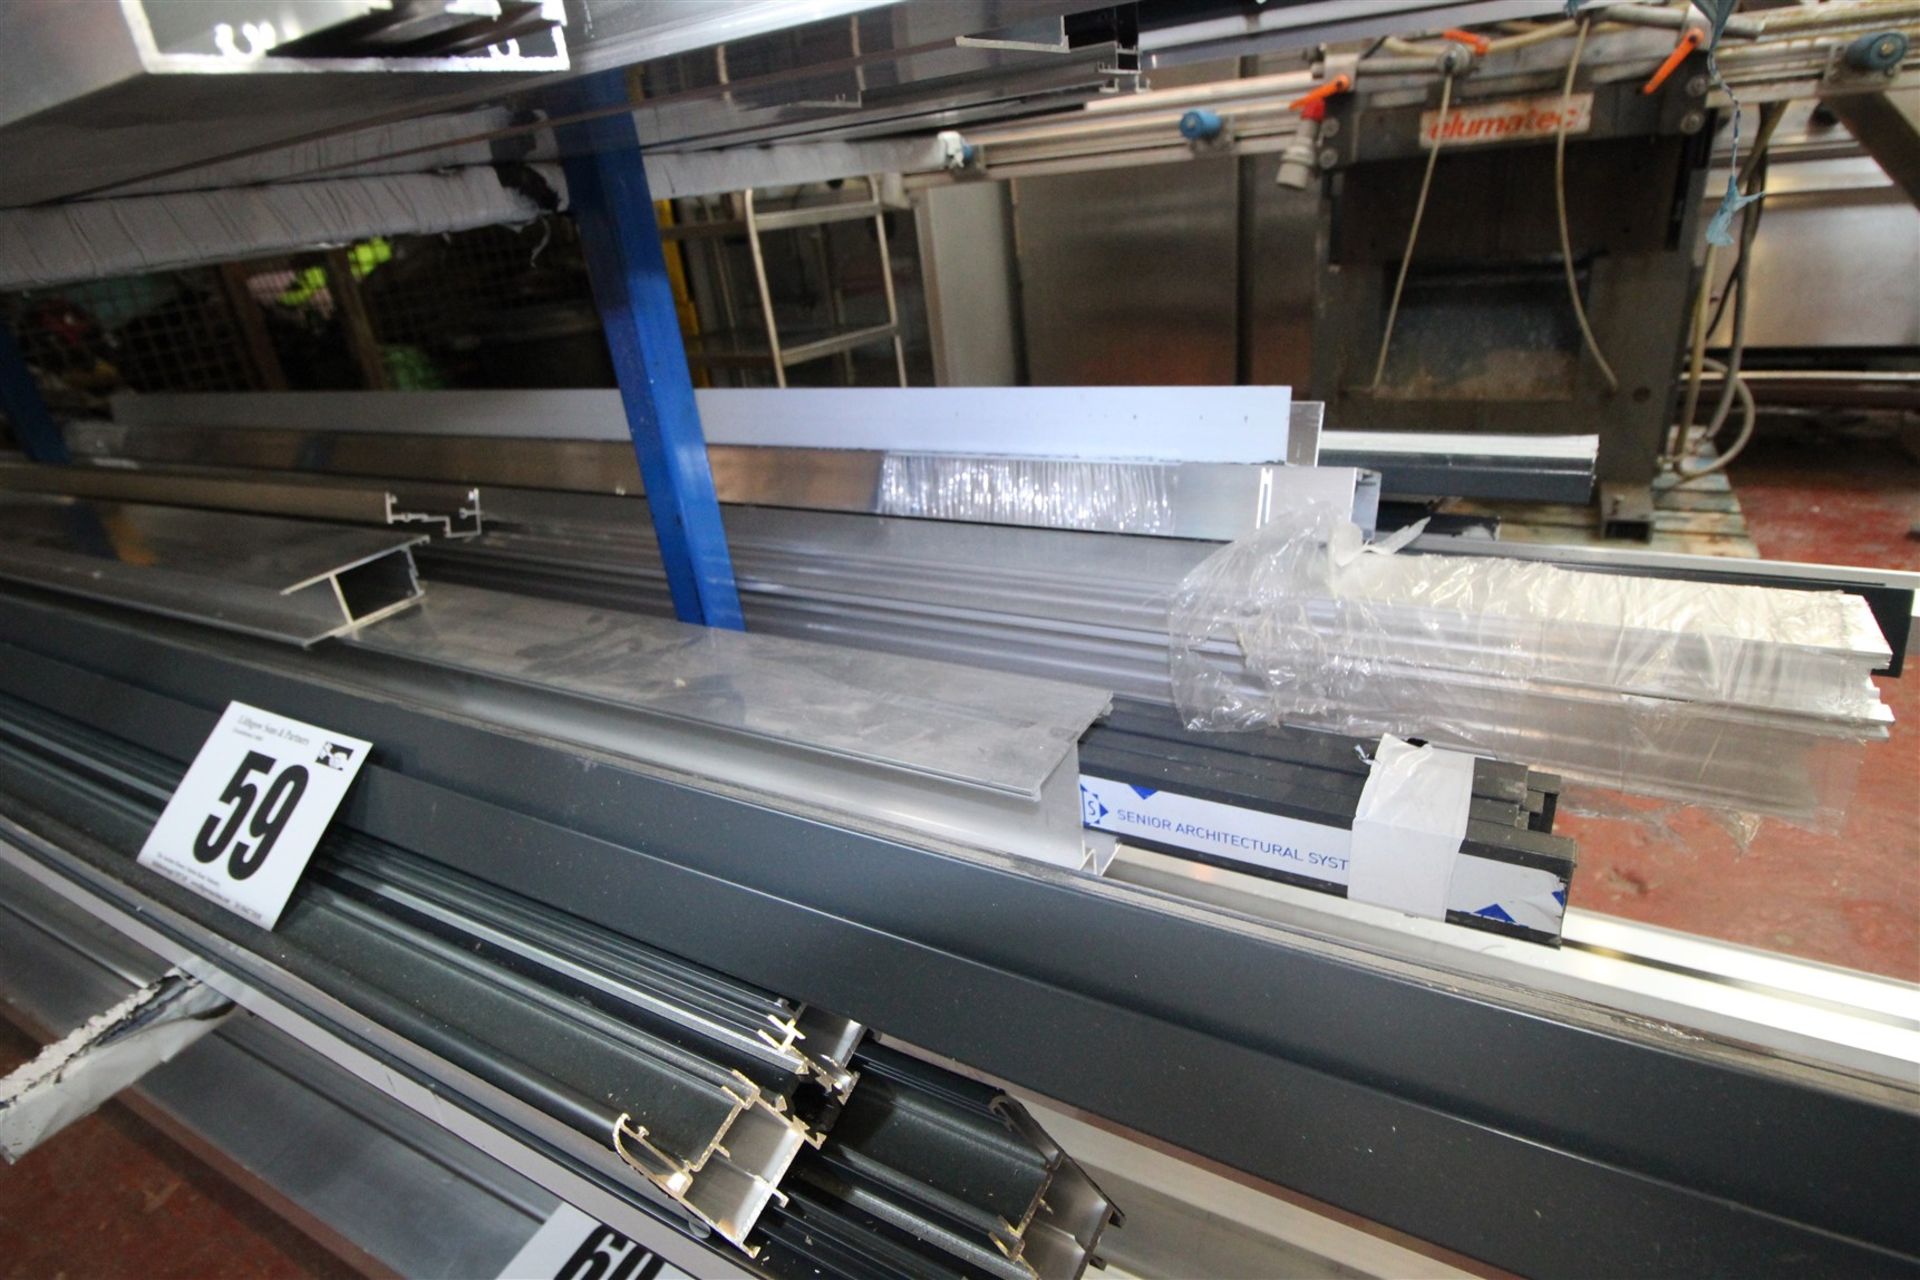 CONTENTS OF NEXT LAYER DOWN OF RACK (SHELF 40INCH WIDE) OF ALUMINIUM EXTRUSION & BOX SECTION.